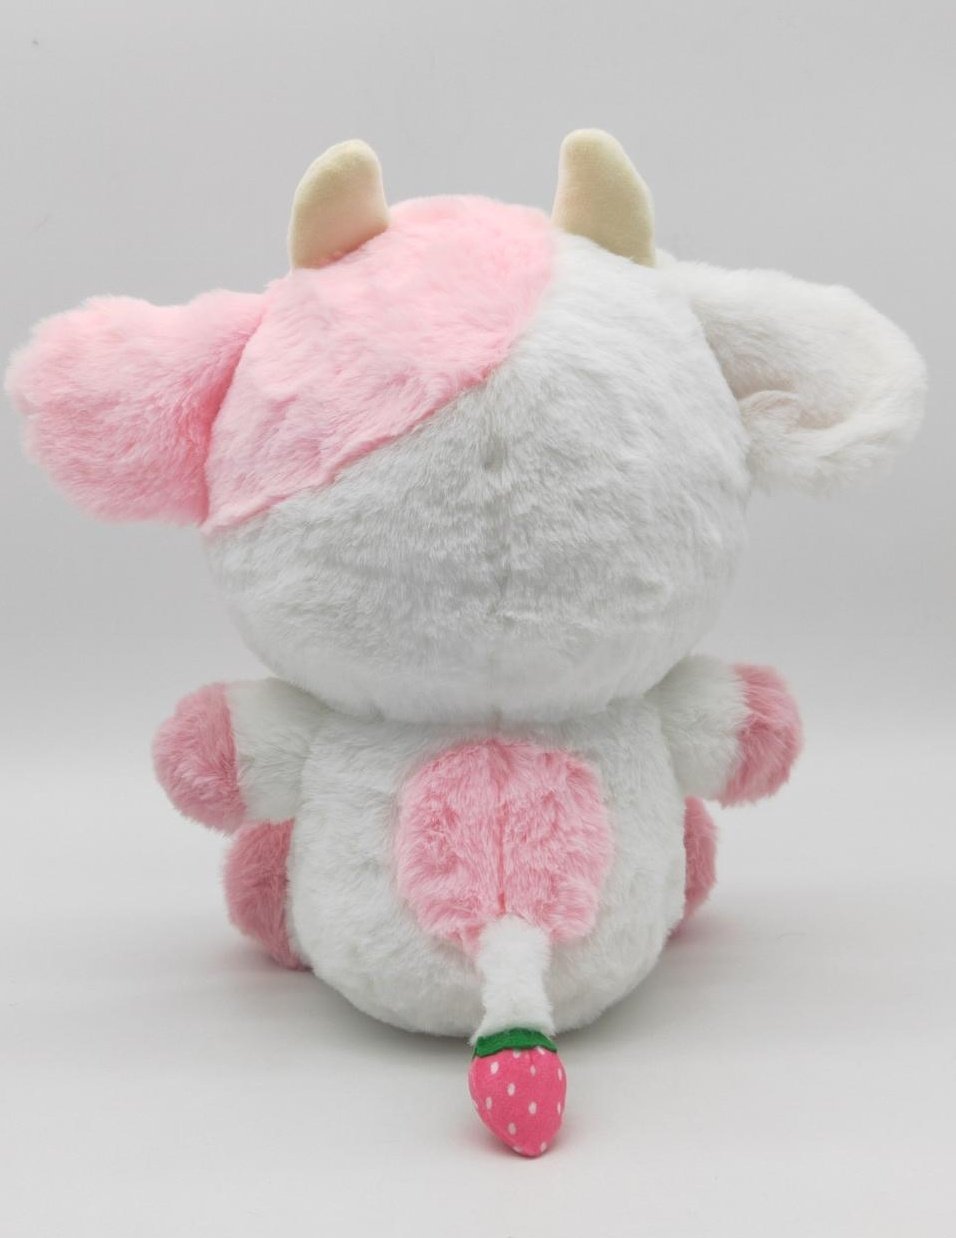 Milkshake the strawberry cow plush and friends by Sugary Carousel